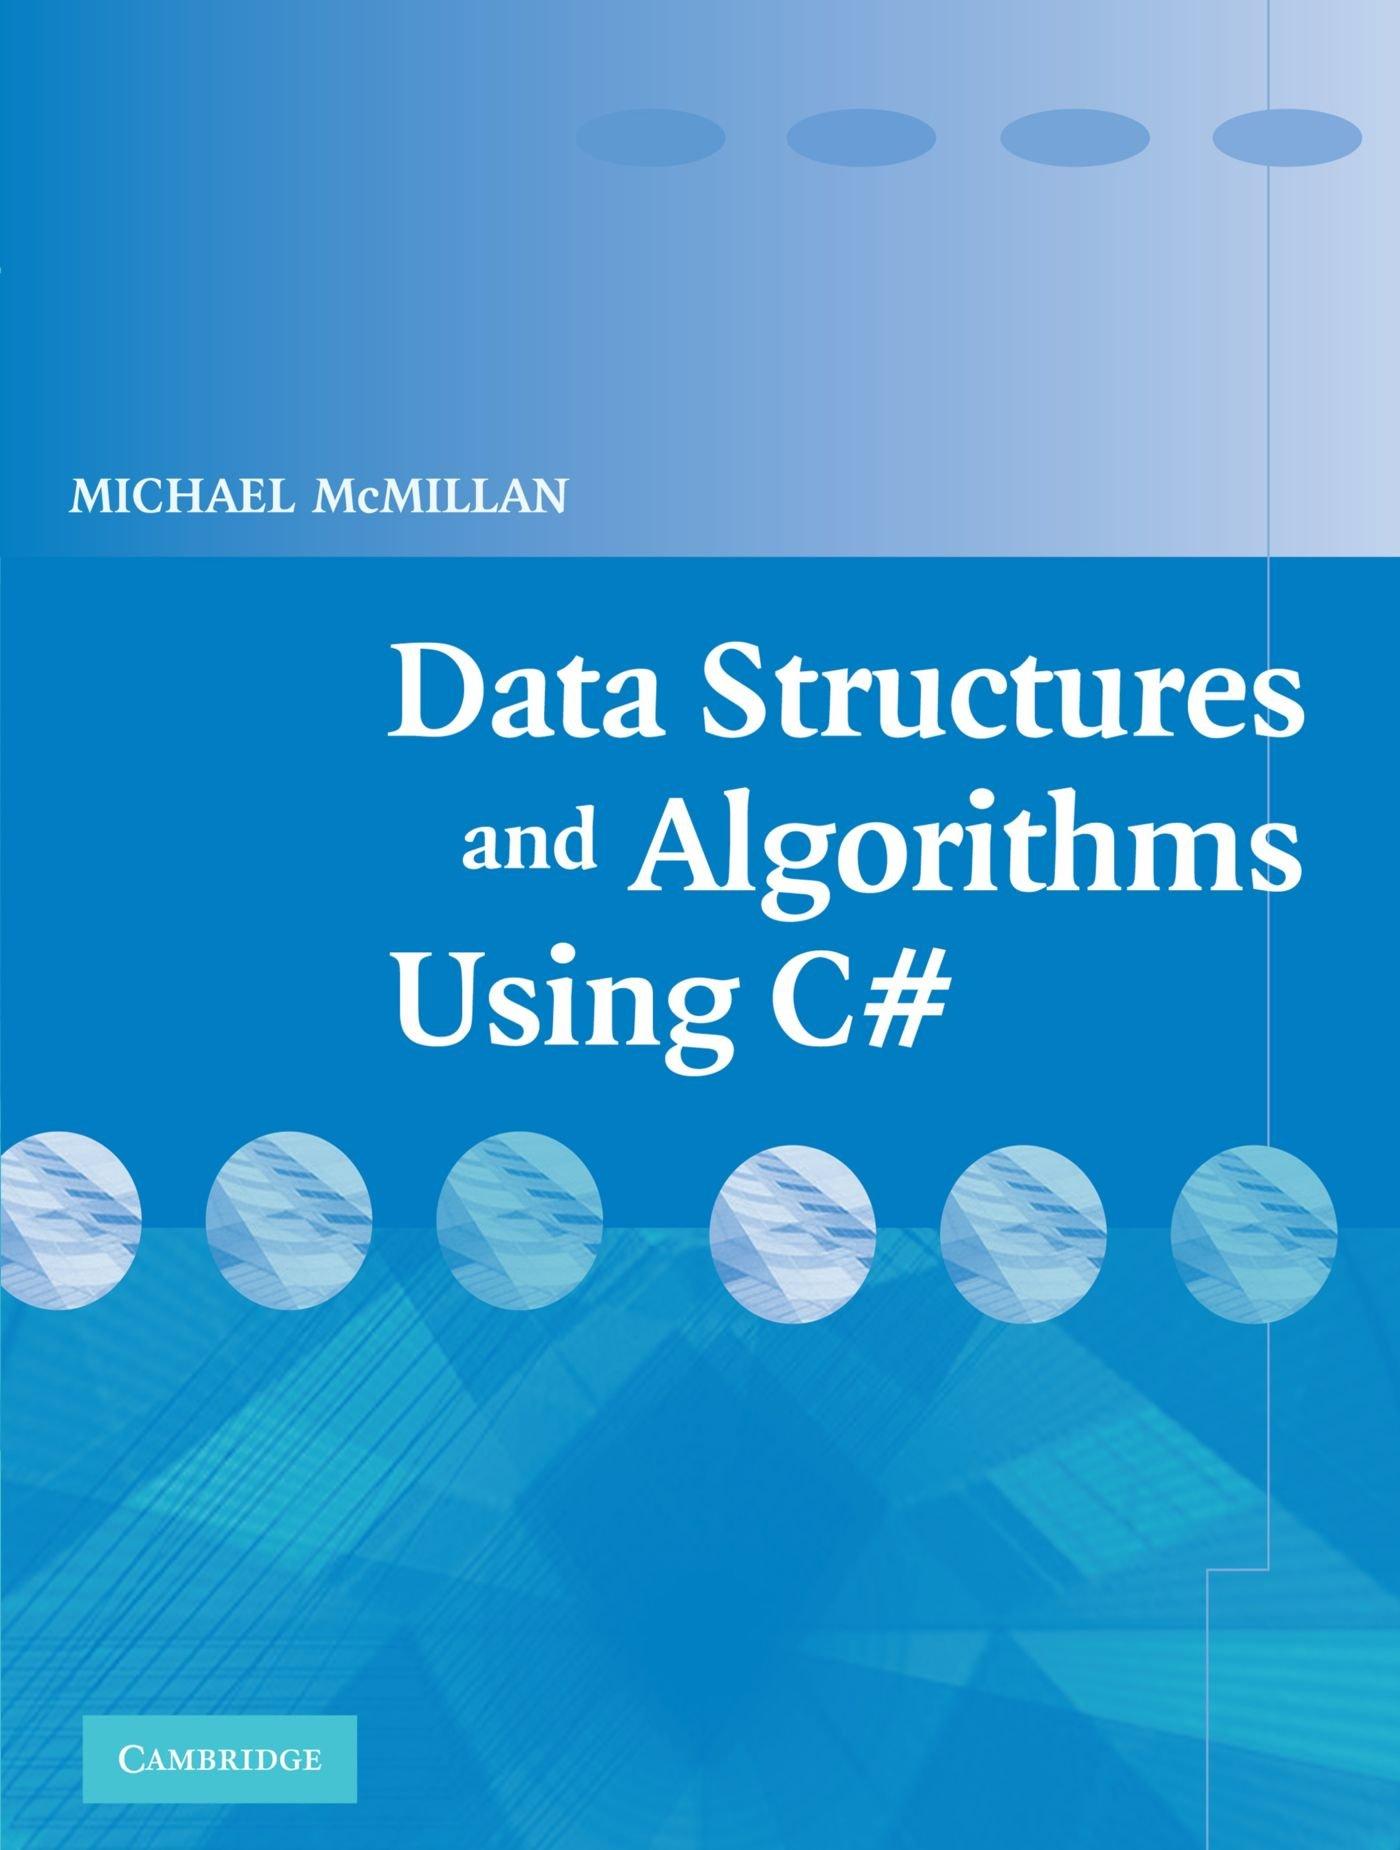 data structures and algorithms using c# 1st edition michael mcmillan 0521670152, 9780521670159